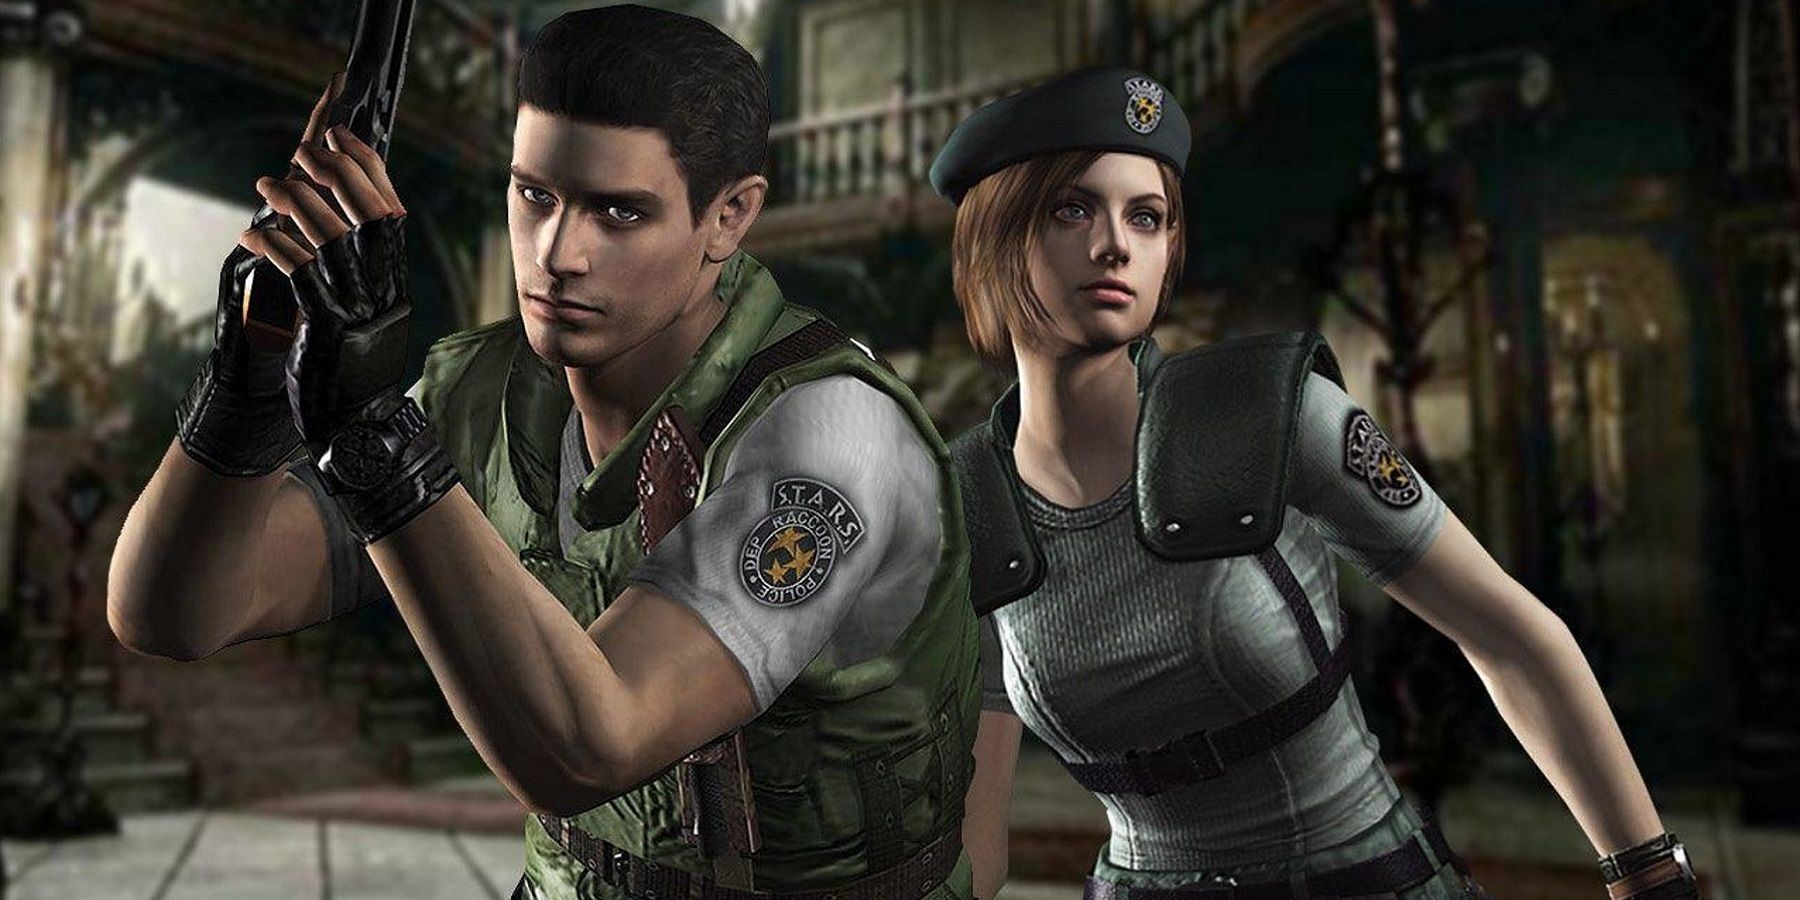 Image from Resident Evil HD showing Chris and Jill front and center.